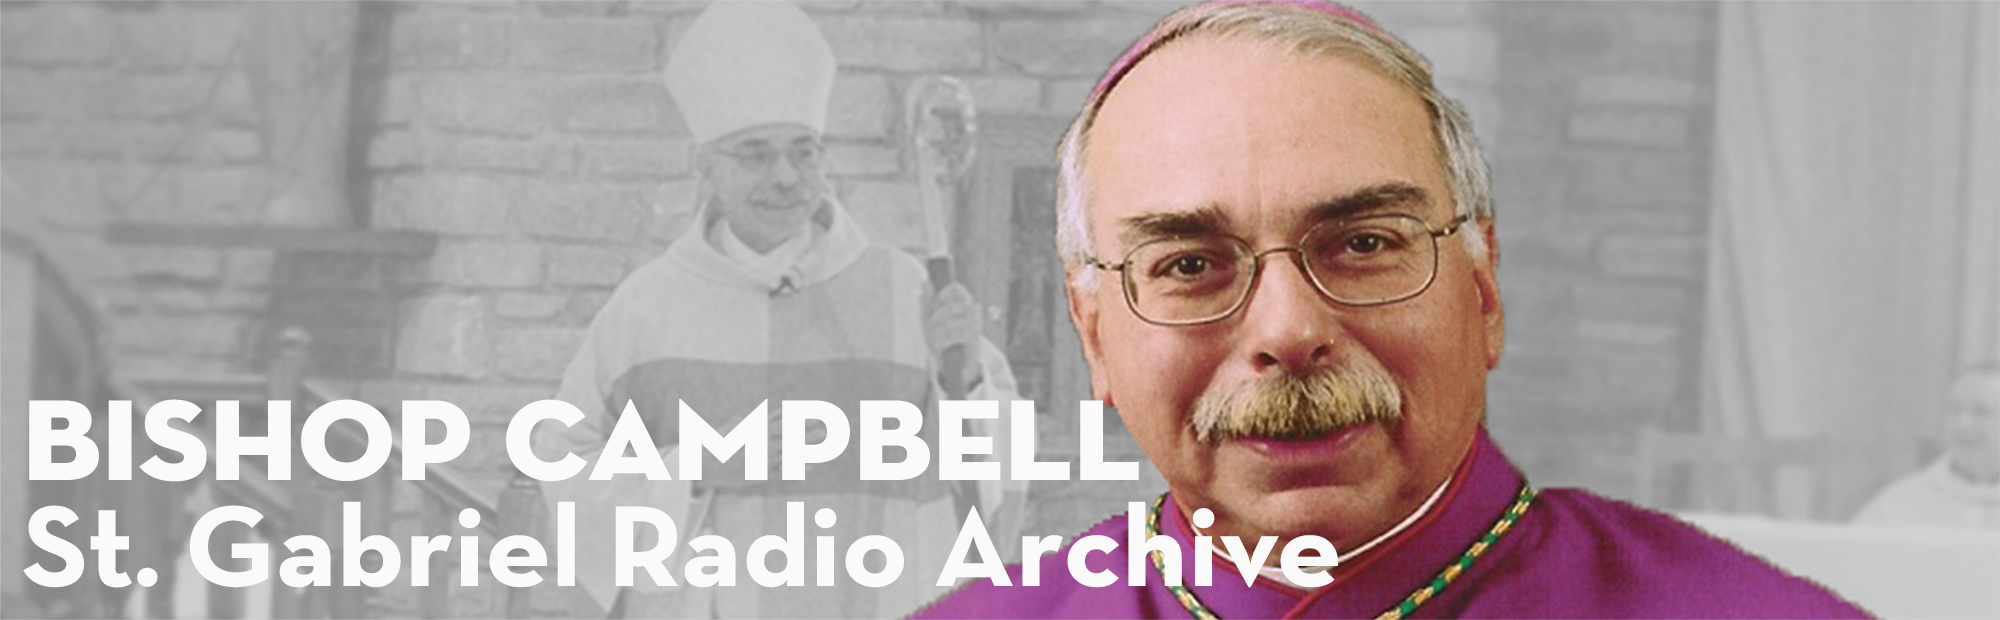 Bishop Campbell on AM 820